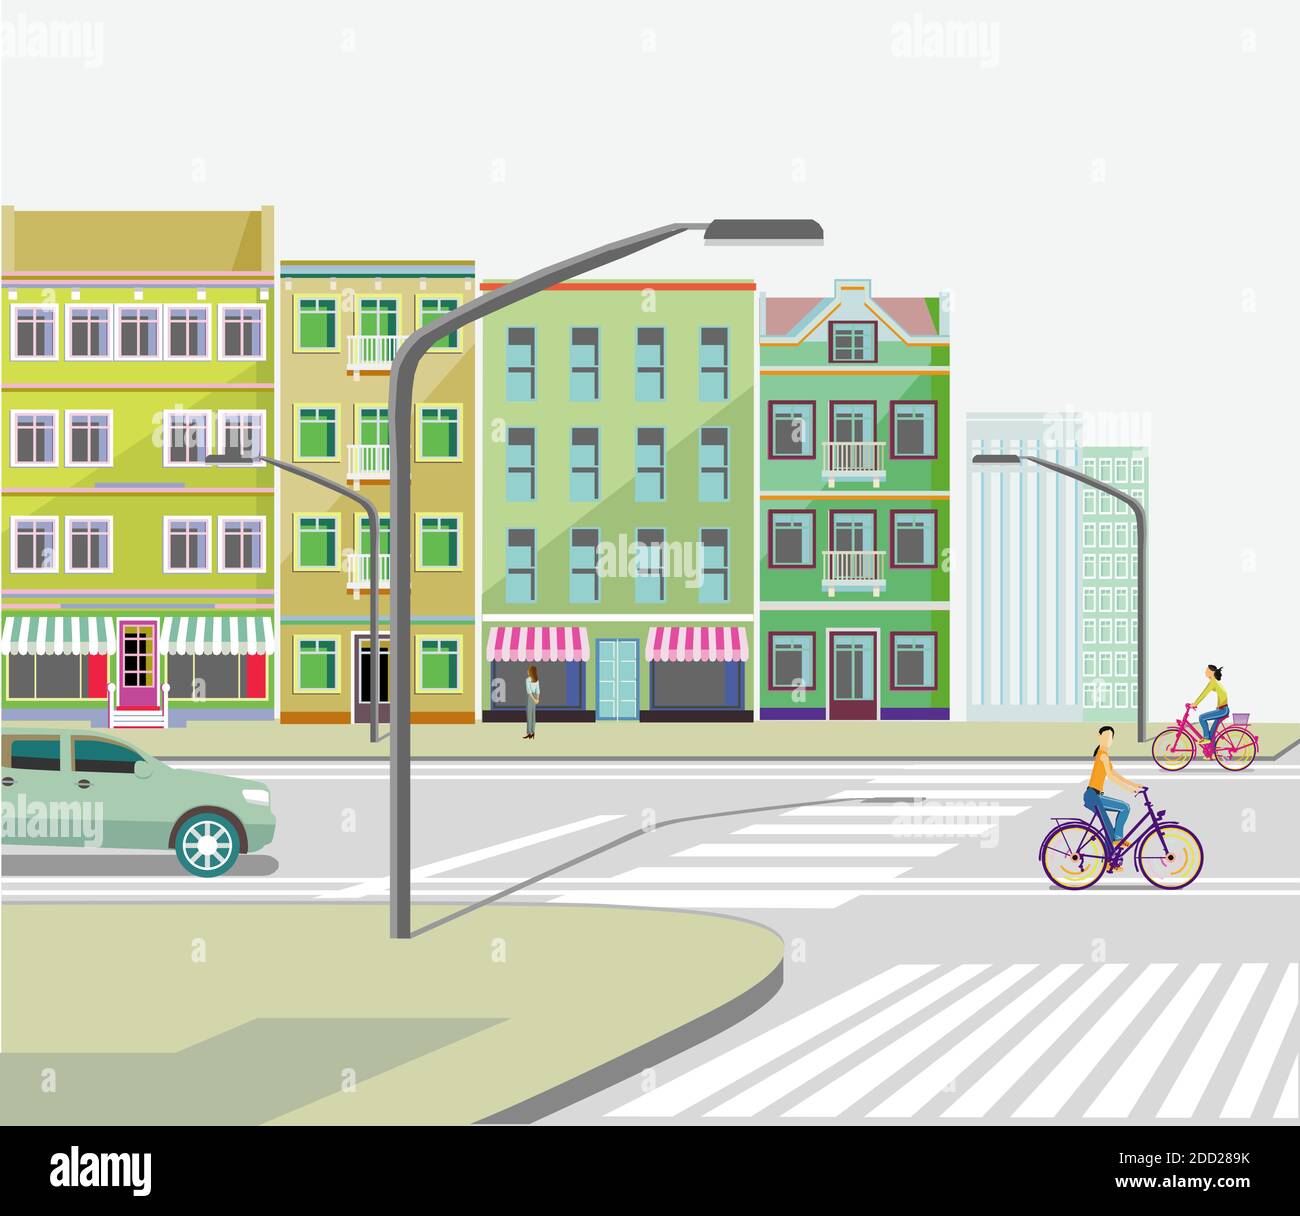 City with road traffic, apartment buildings and cyclists Stock Vector